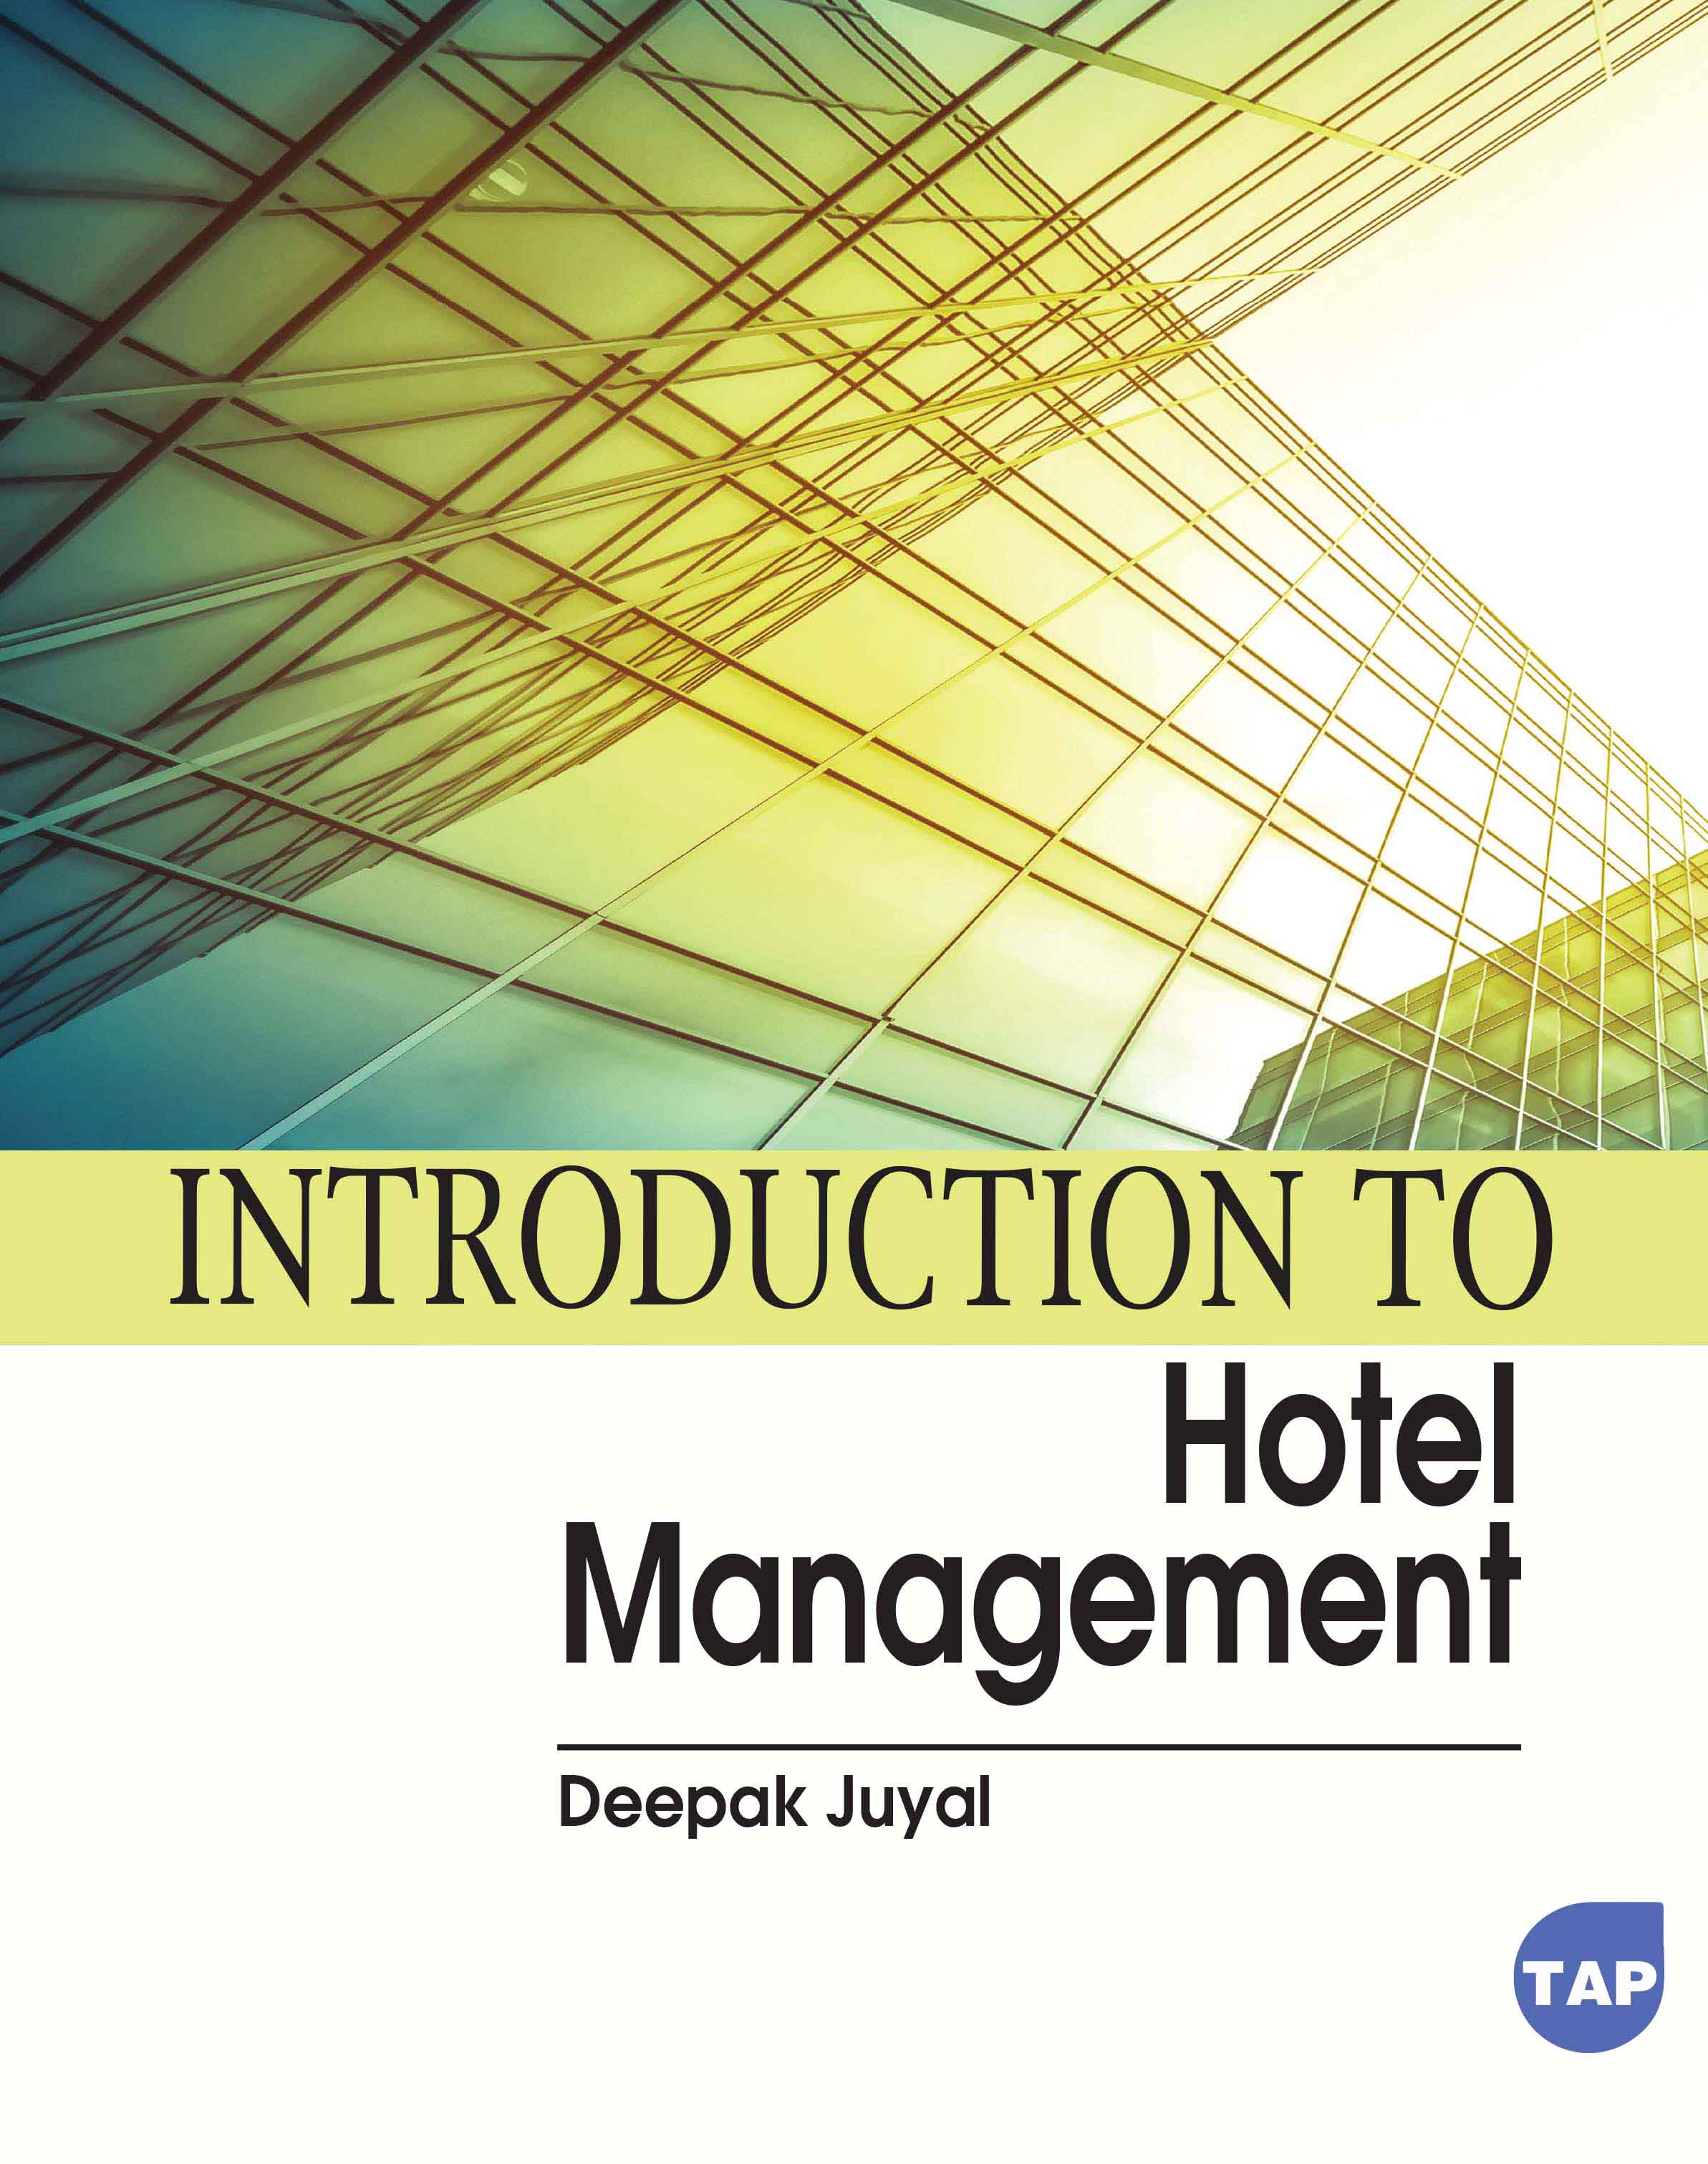 Introduction to Hotel Management